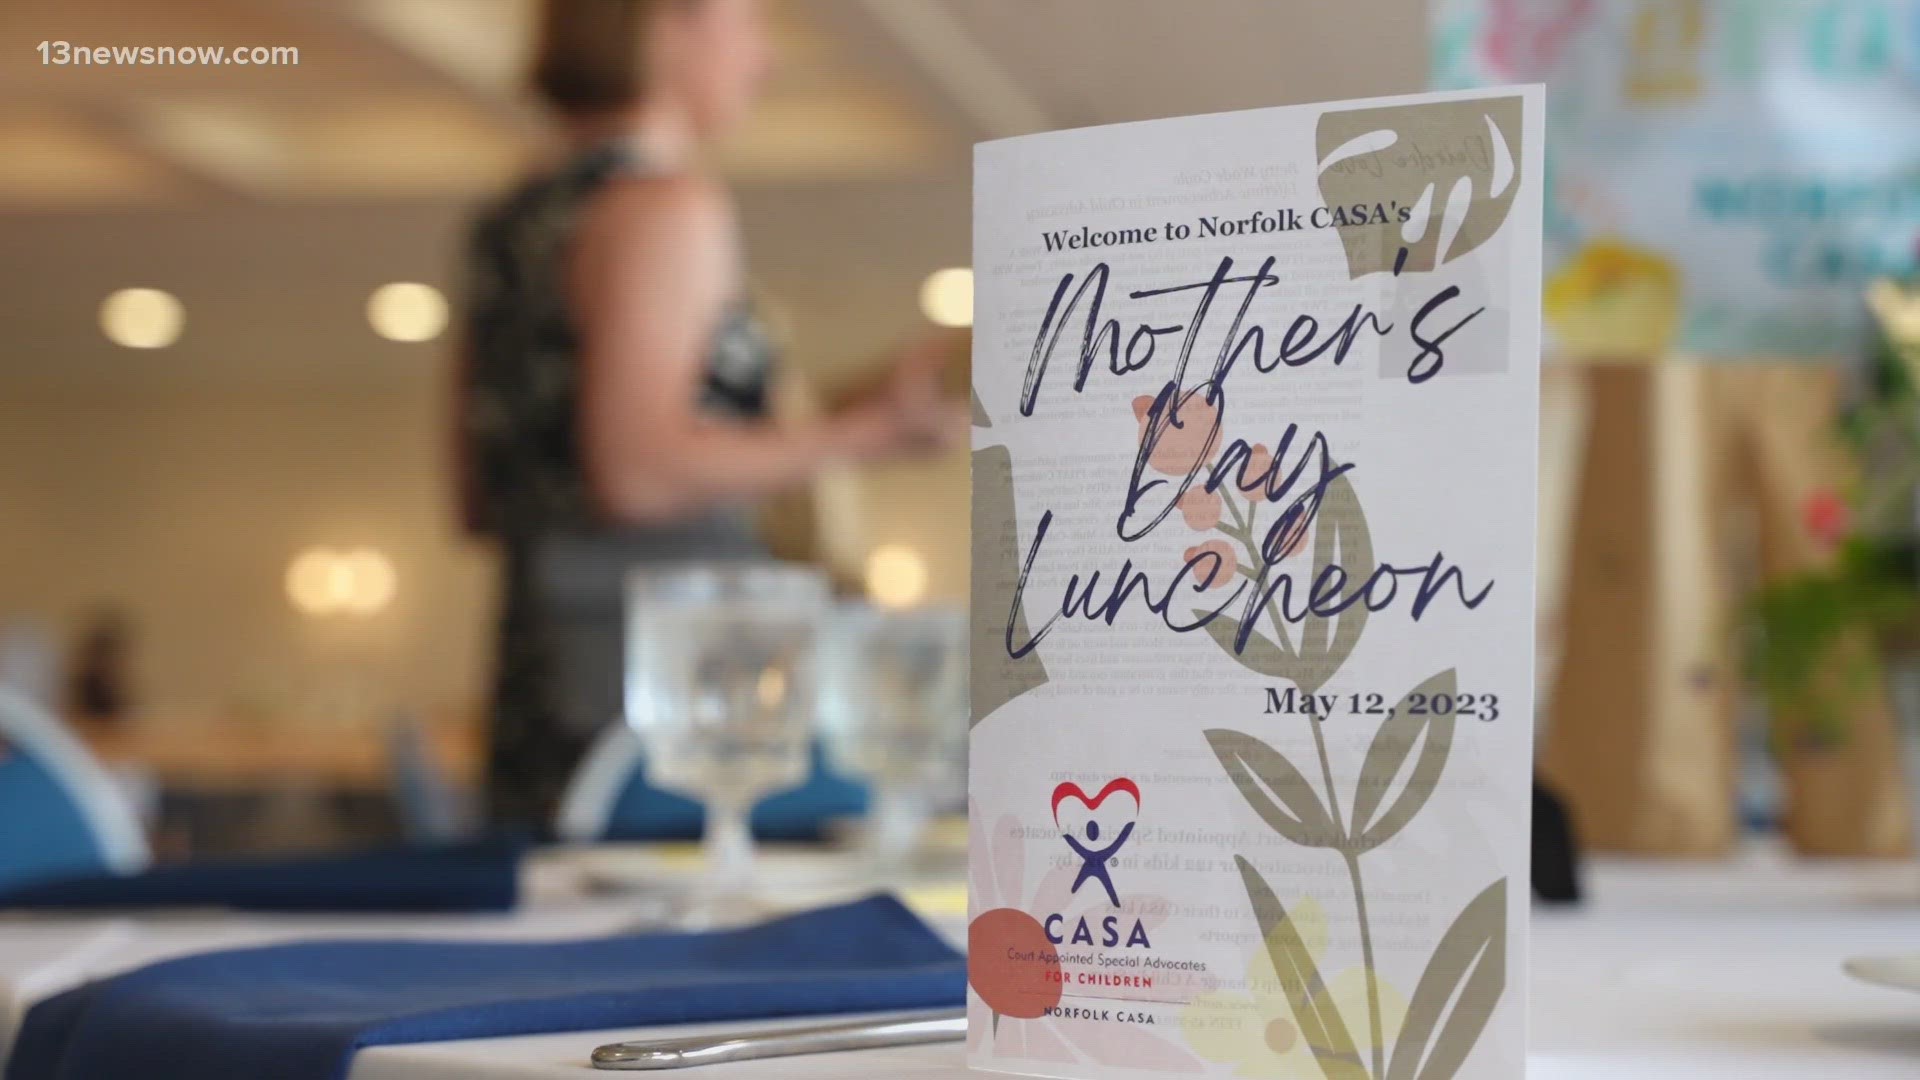 Mother's Day weekend kicked off with a special event that benefits children who need extra support.